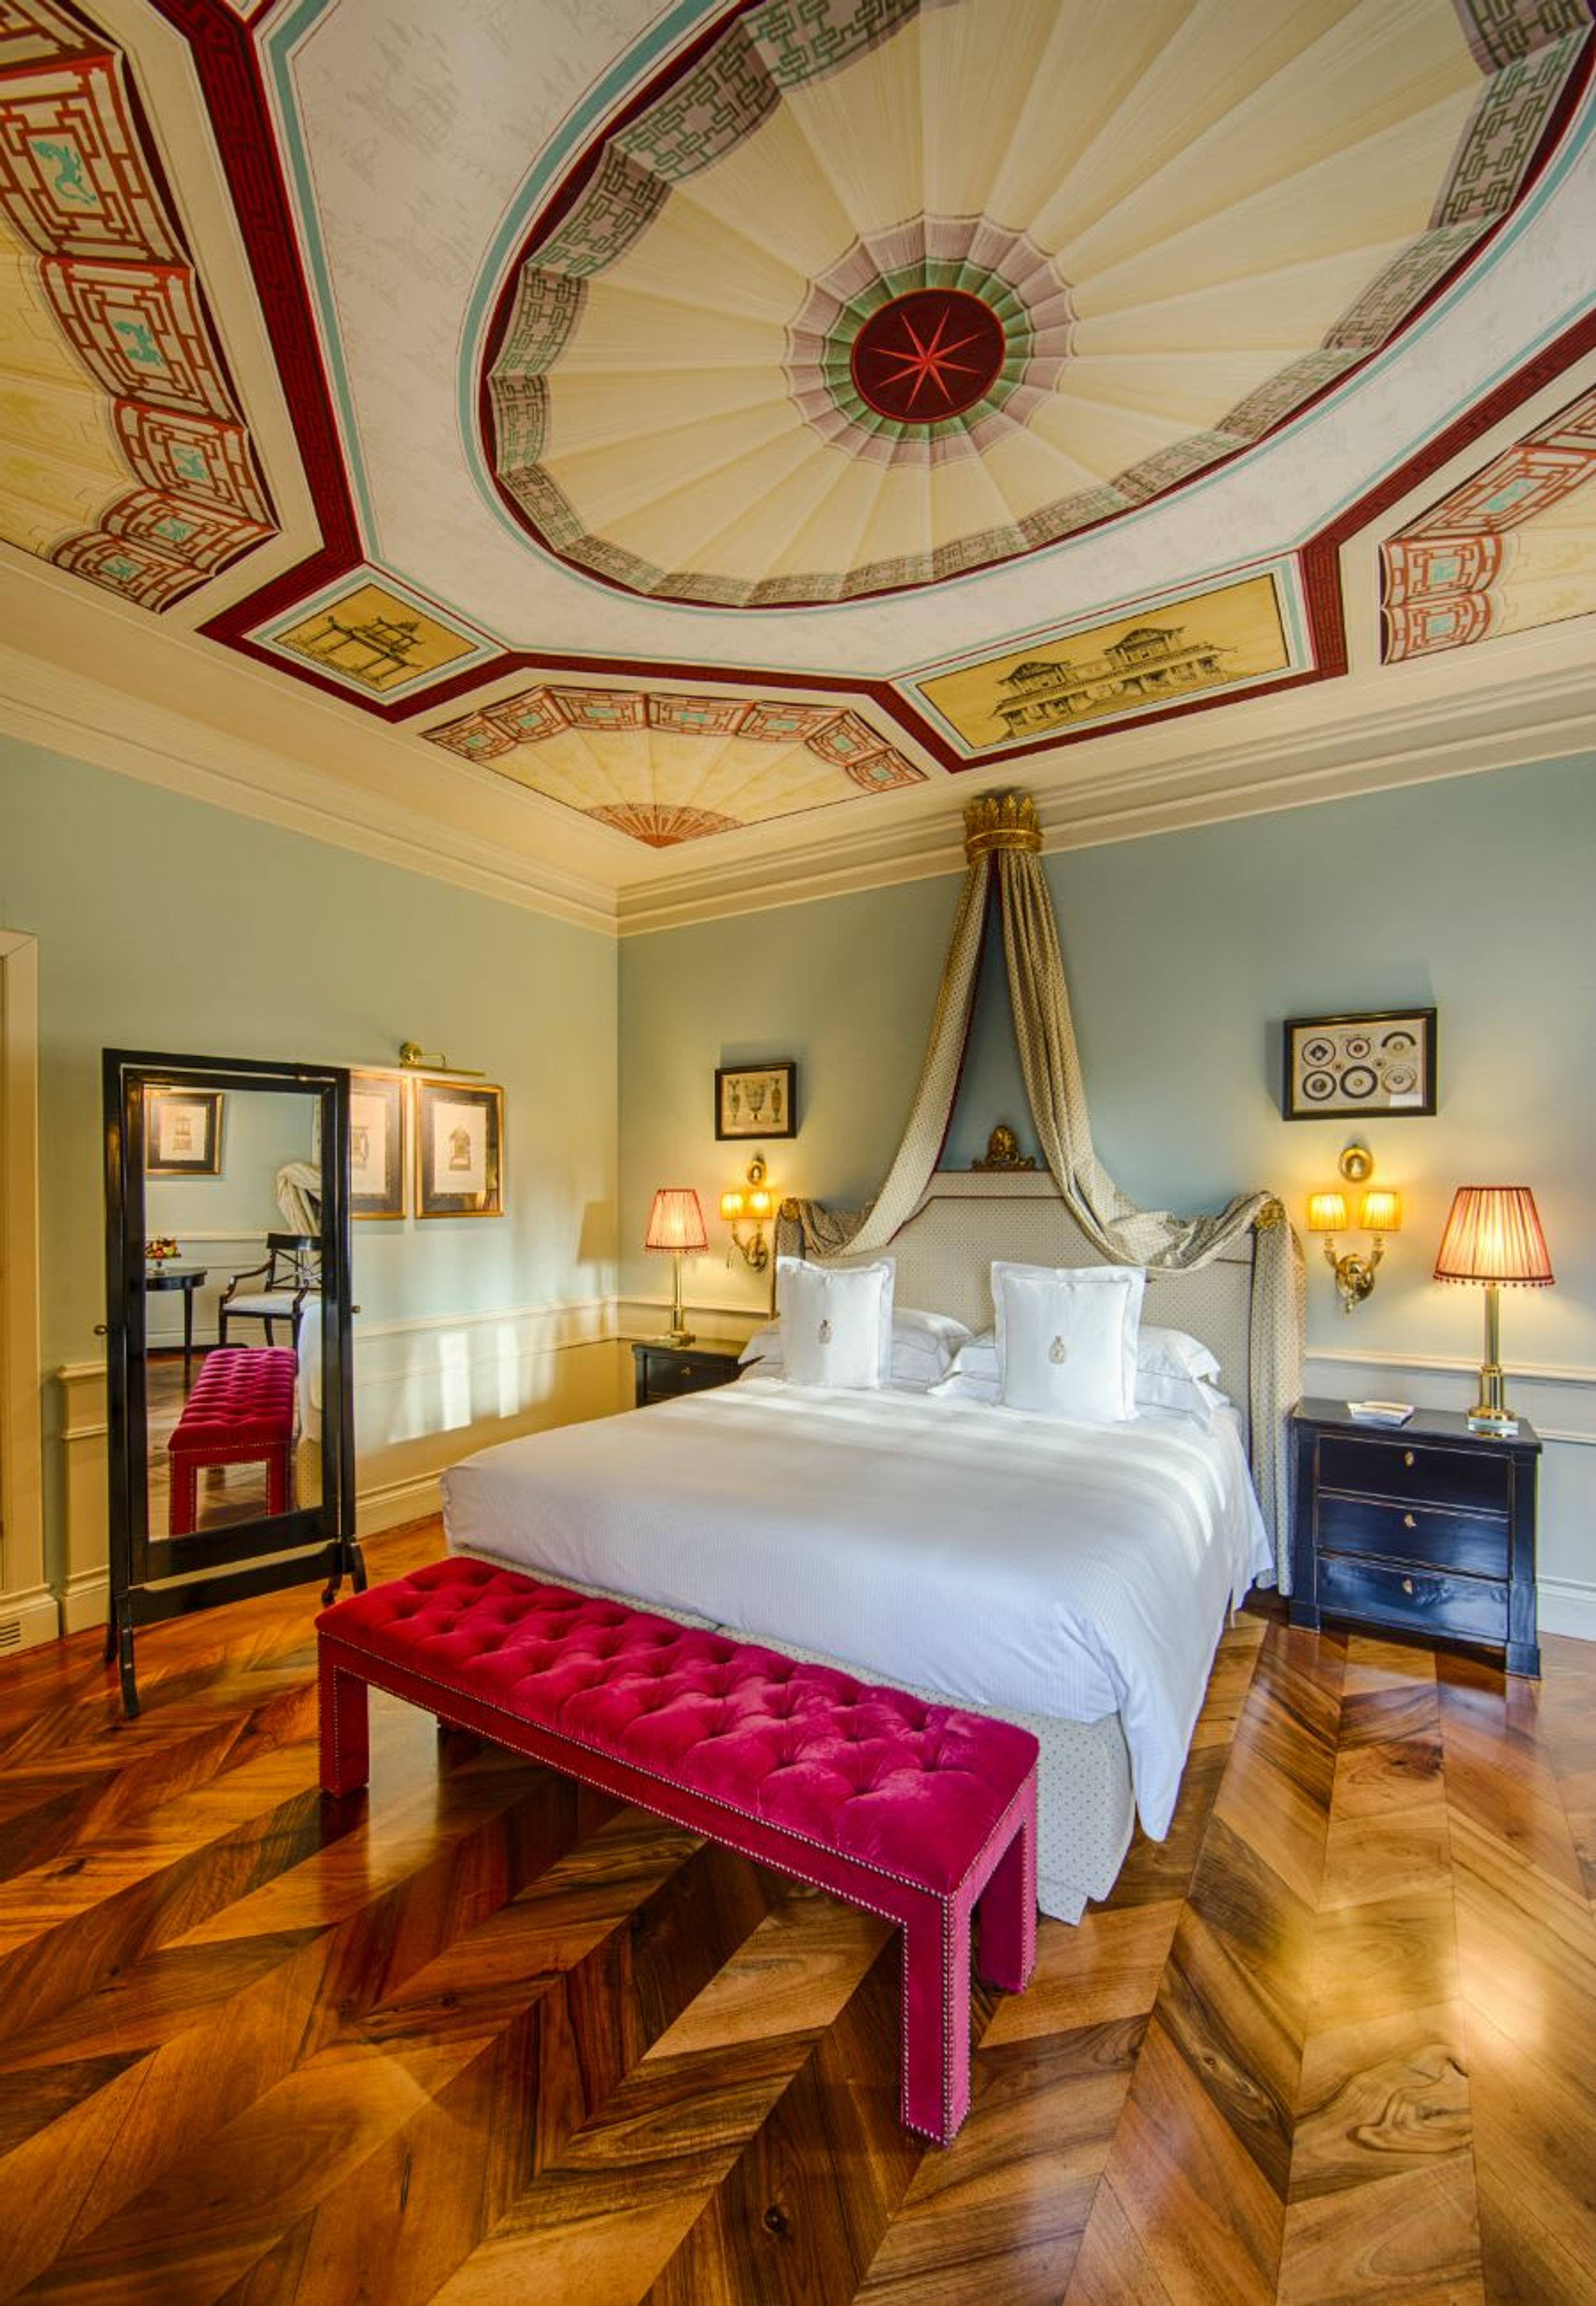 Beautiful frescoed ceilings and a bright pink velvet bench make this Deluxe room exquisite.